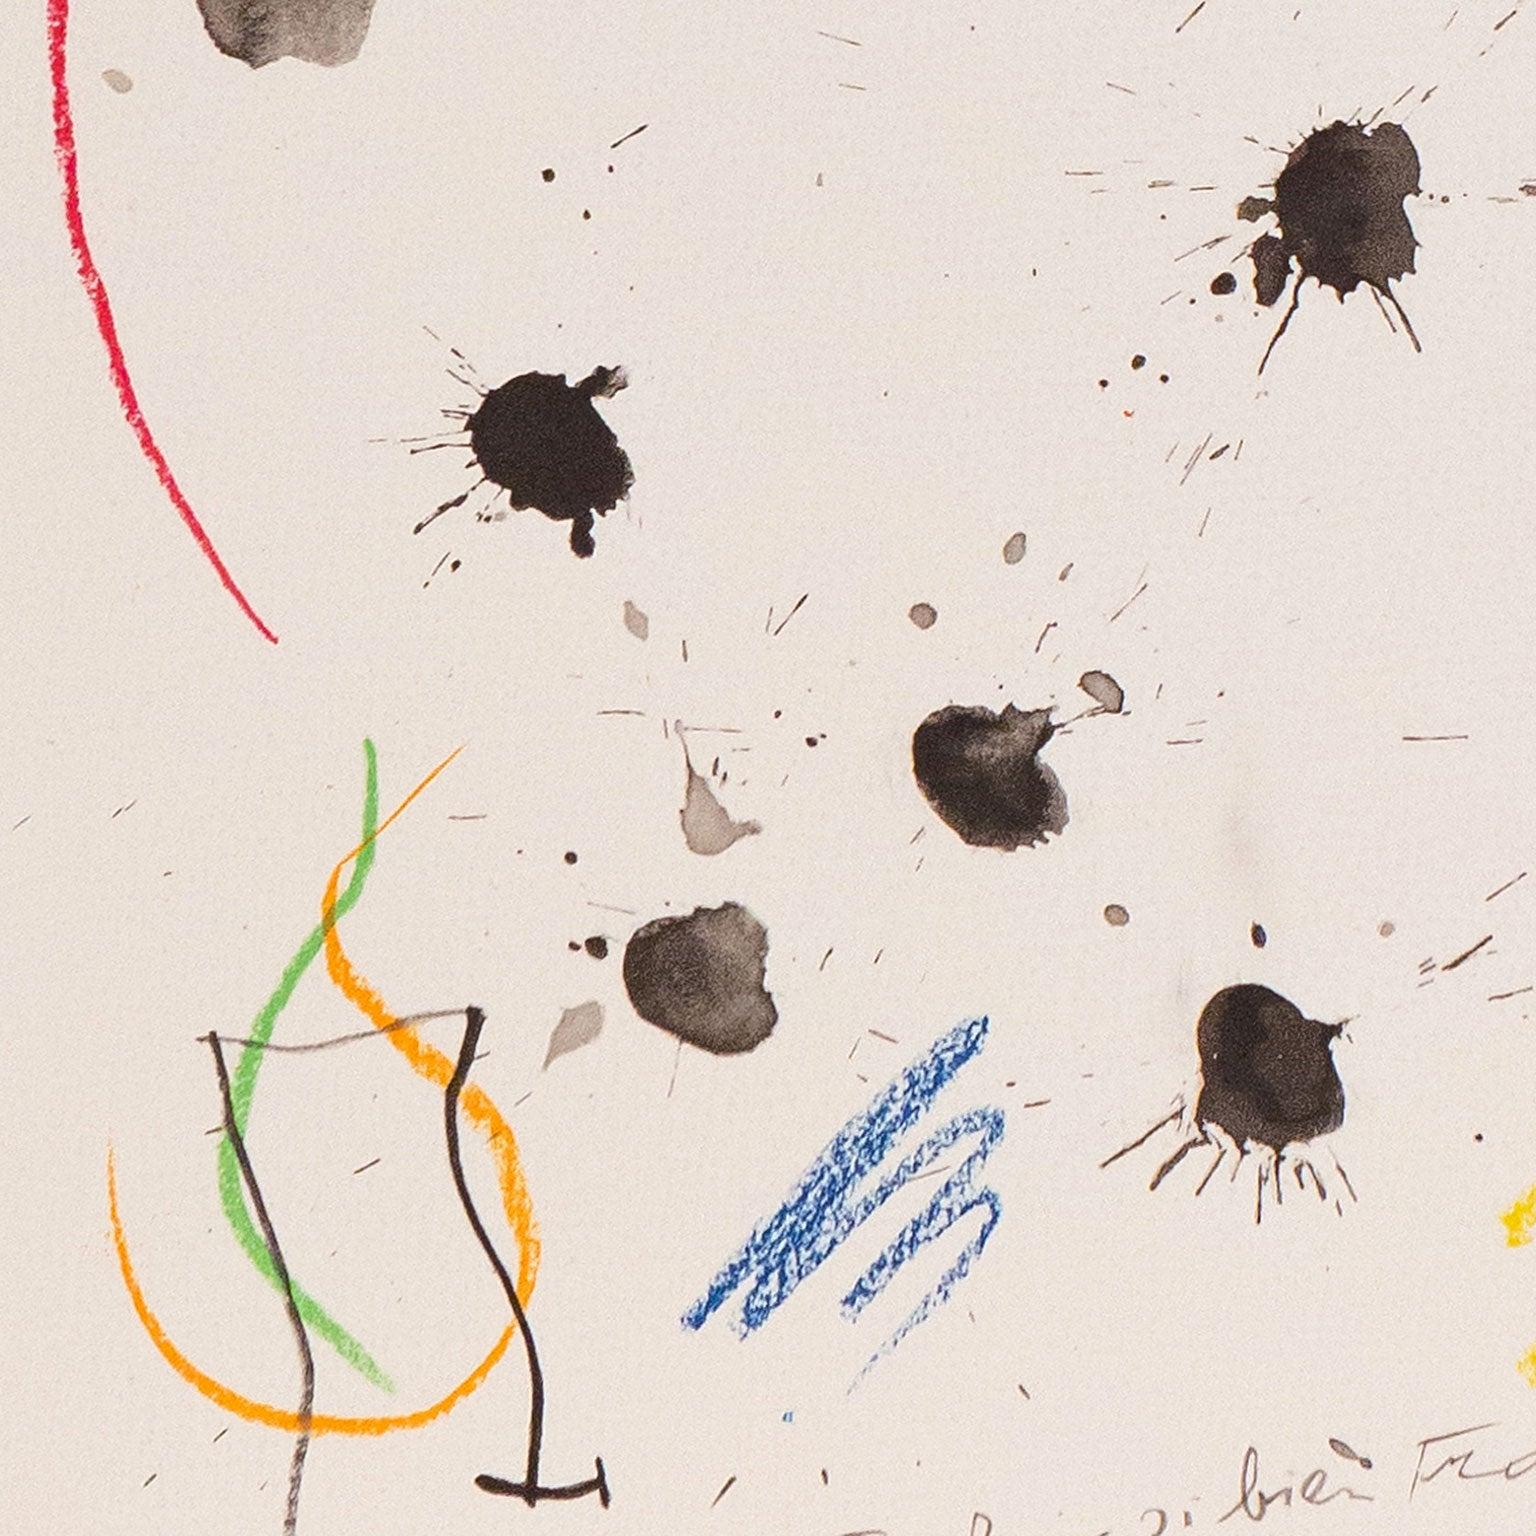 Joan Miró is one of the greatest artists of the 20th century. He is renowned internationally as a painter, sculptor, printmaker, and ceramicist.  

Miró’s works, which were at the intersection between Surrealism and abstraction, began receiving